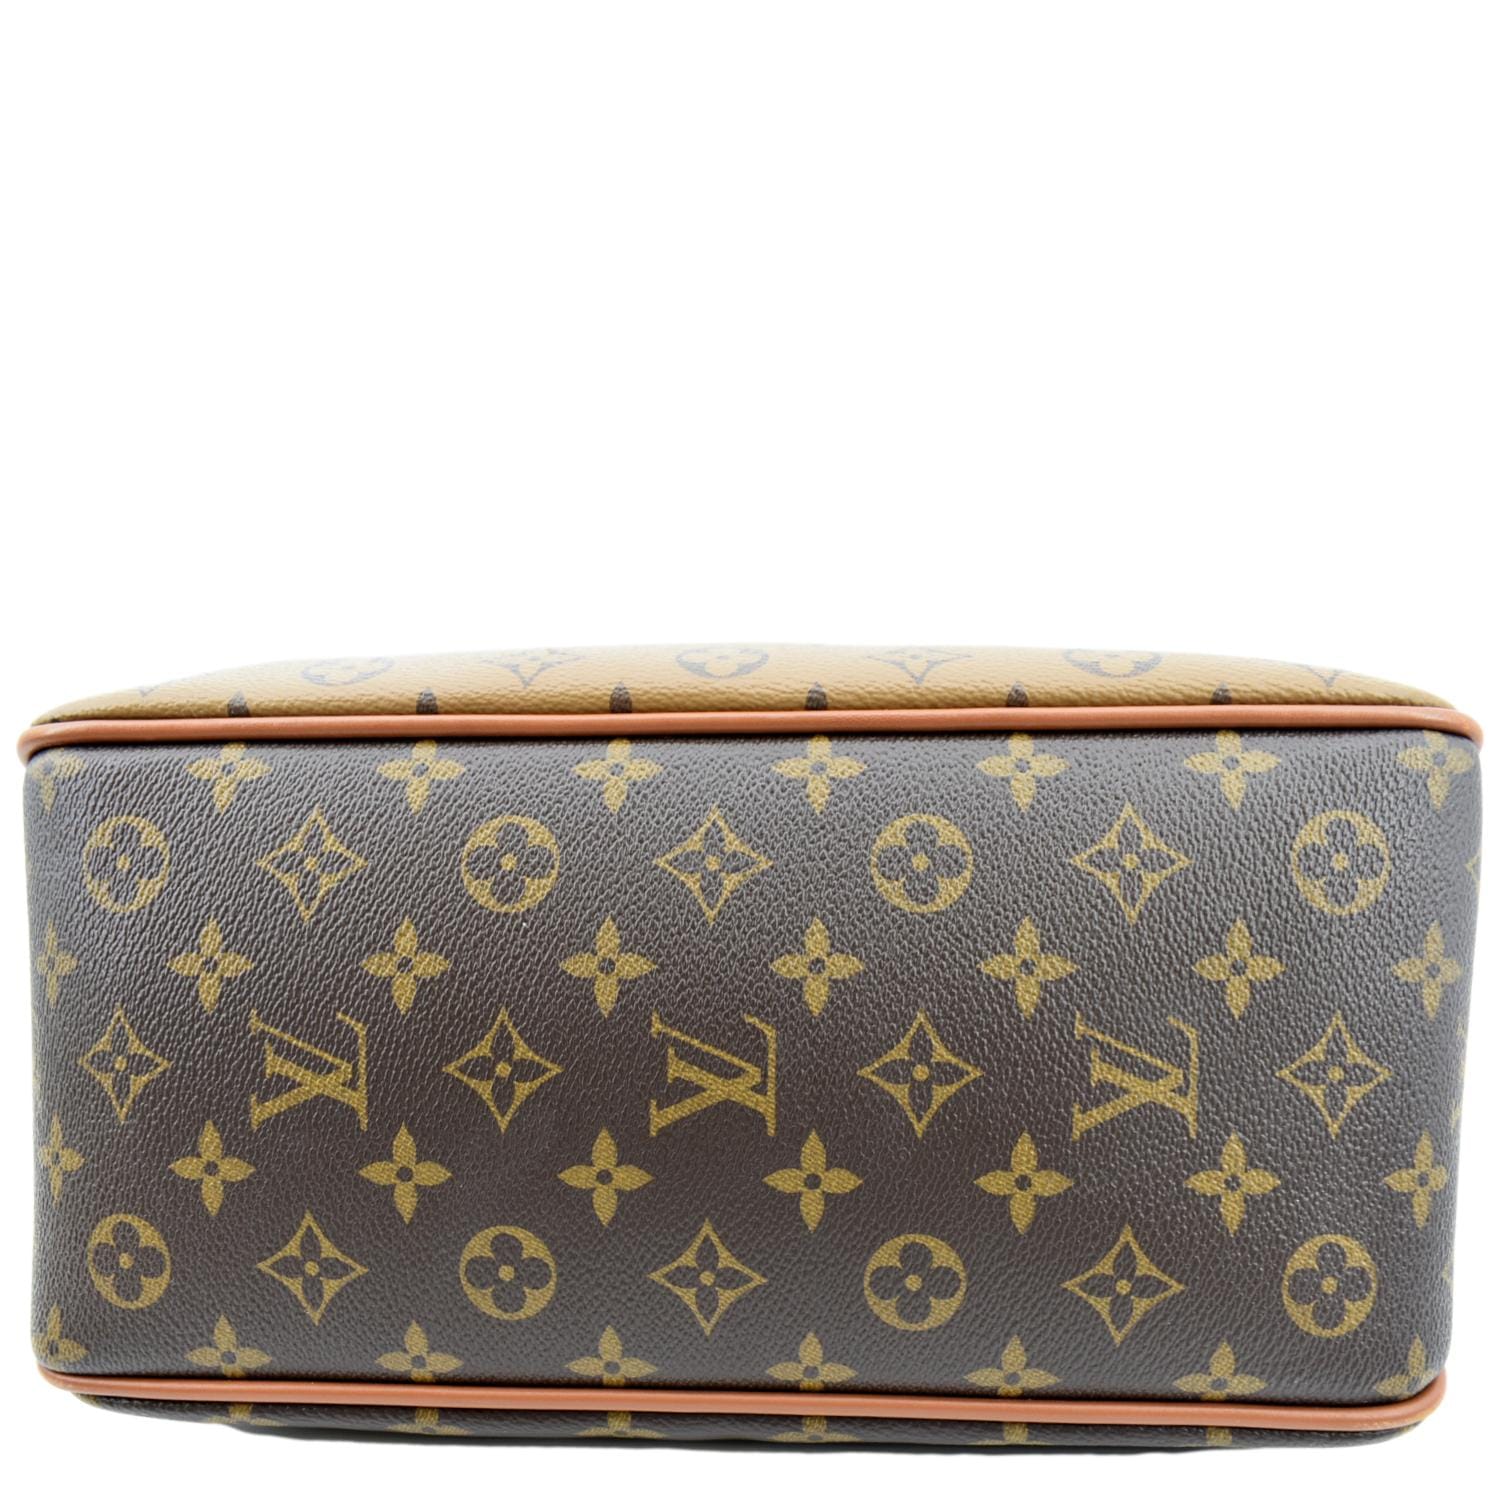 Only 1206.40 usd for Louis Vuitton Bag, Monogram Canvas Dauphine